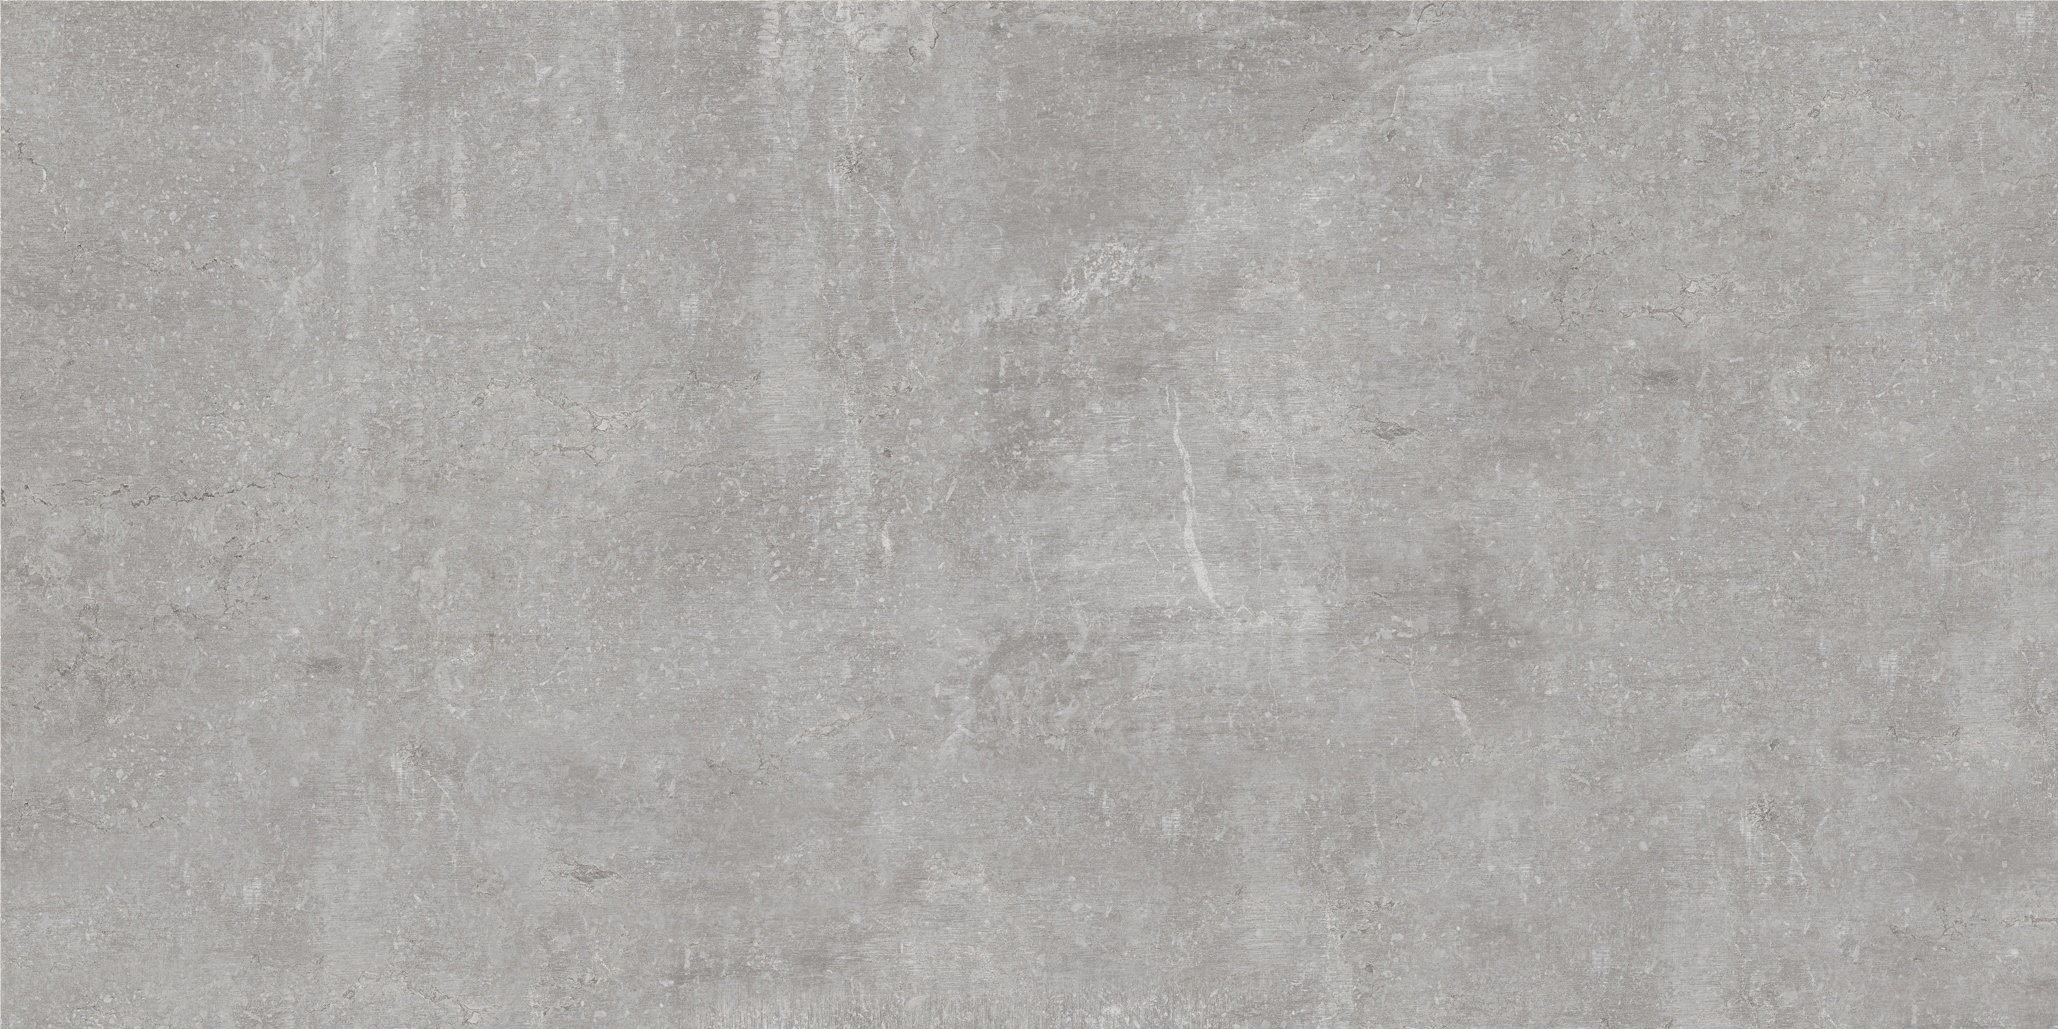 mica pattern glazed porcelain field tile from nexus anatolia collection distributed by surface group international matte finish pressed edge 16x32 rectangle shape